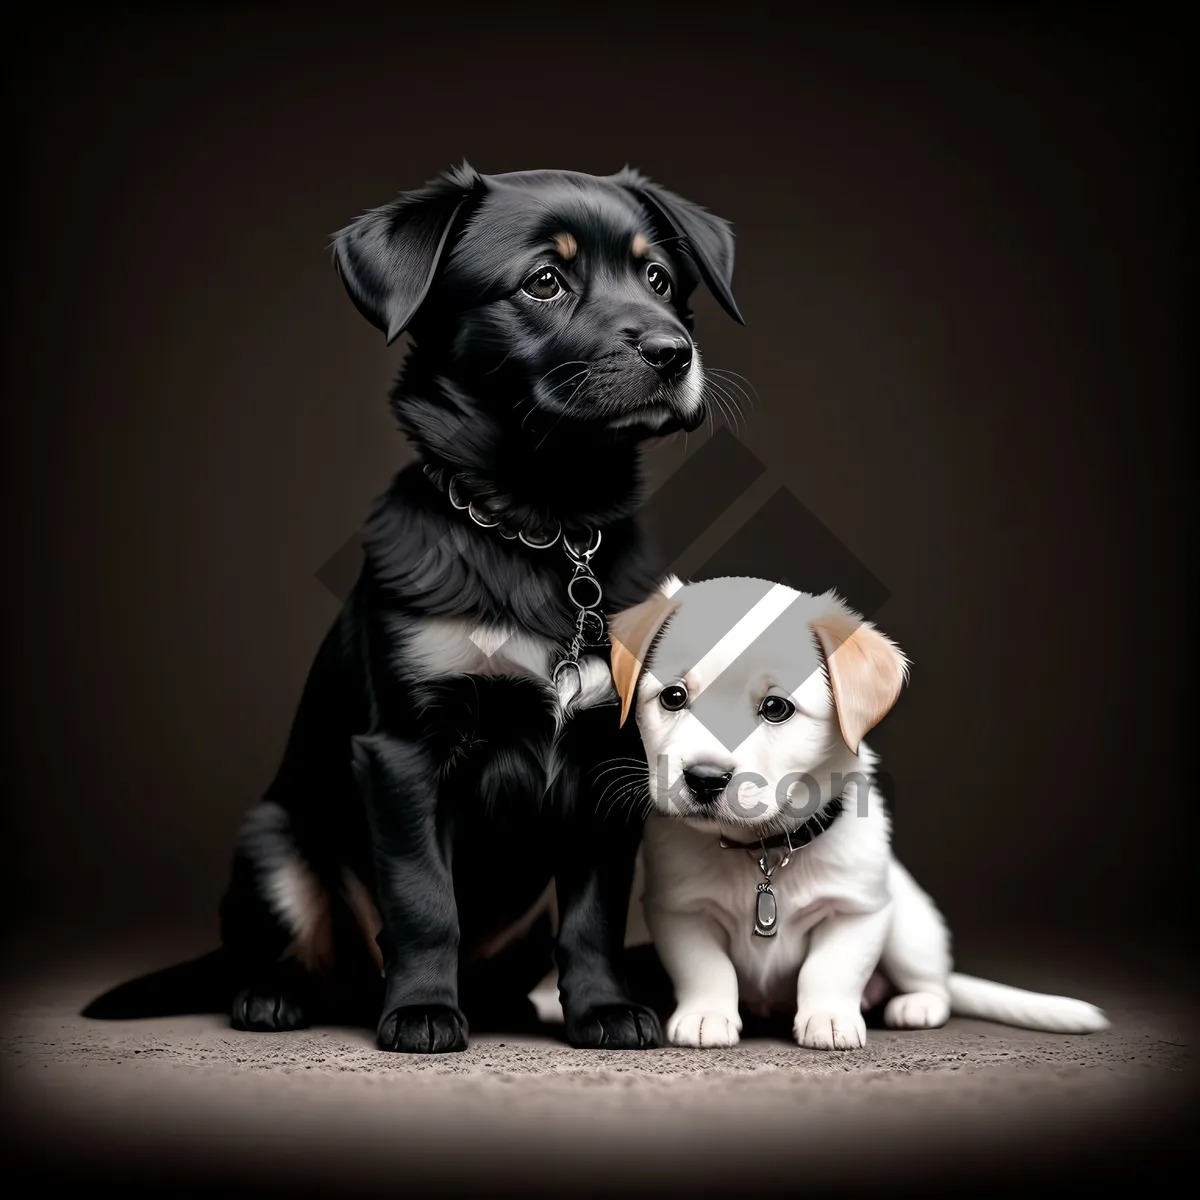 Picture of Adorable Bull Dog Puppy with Collar, Sitting